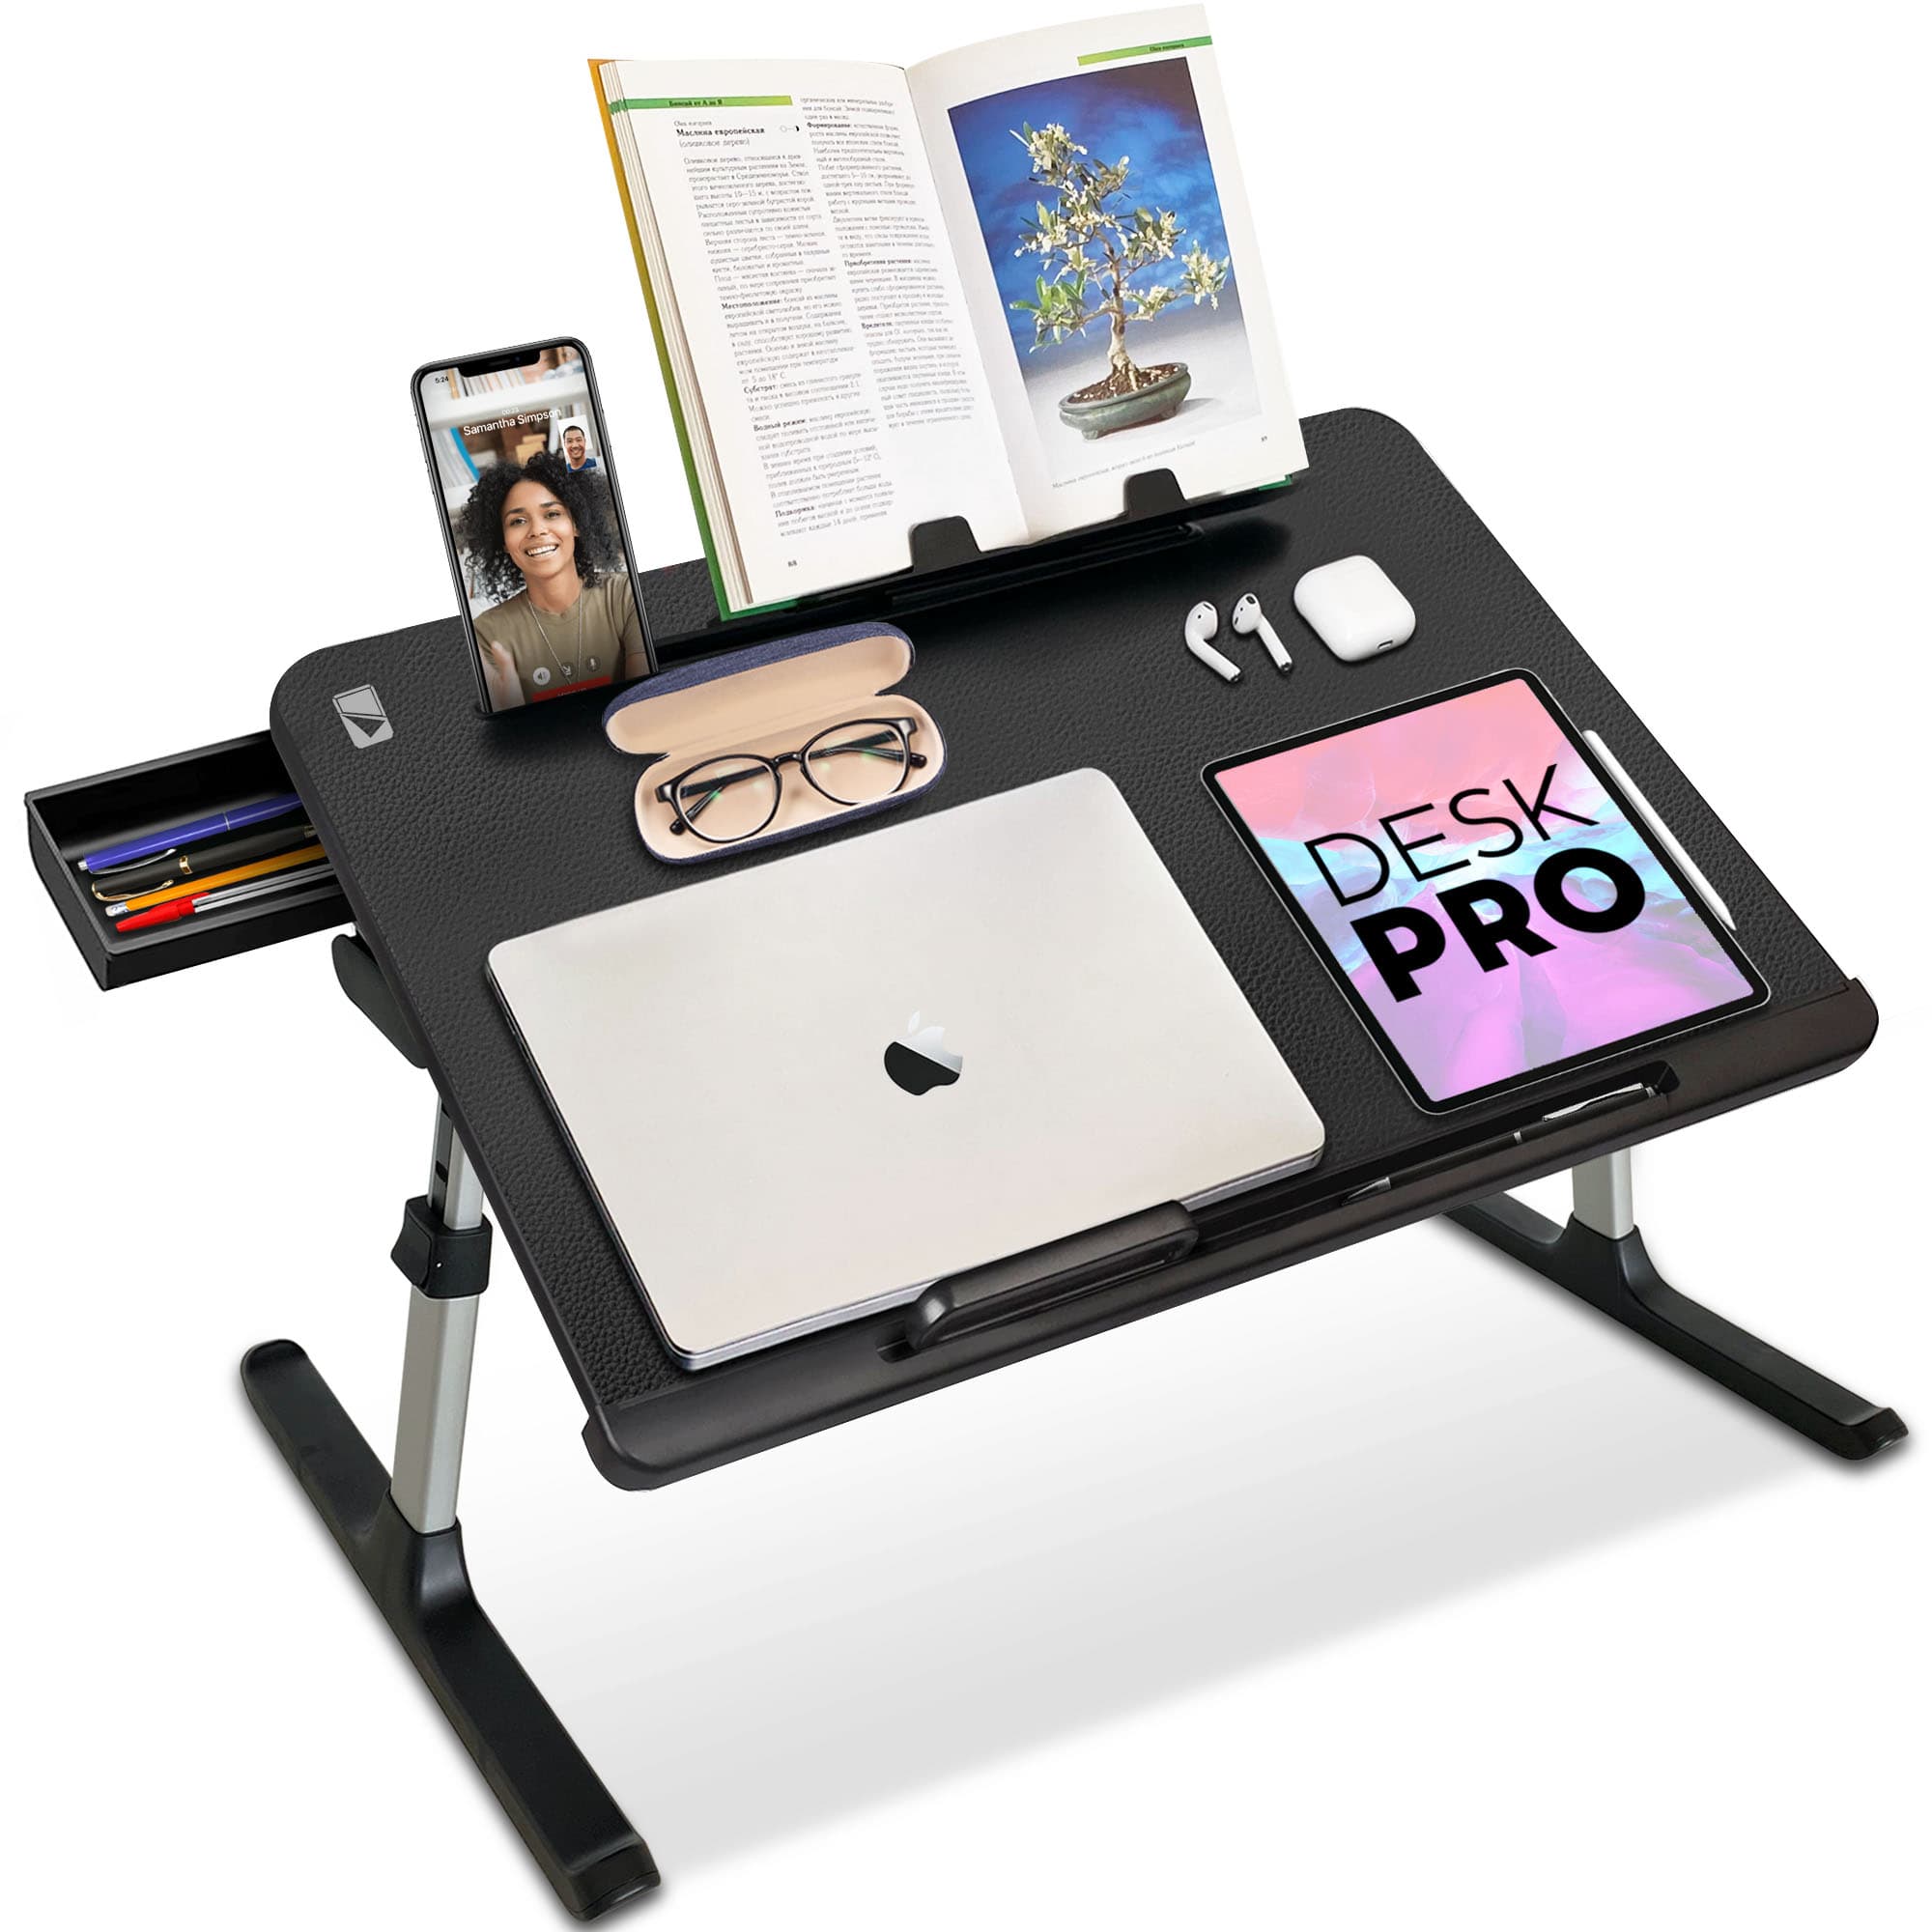 Foldable laptop / tablet stand with 5 adjustment positions - BPG